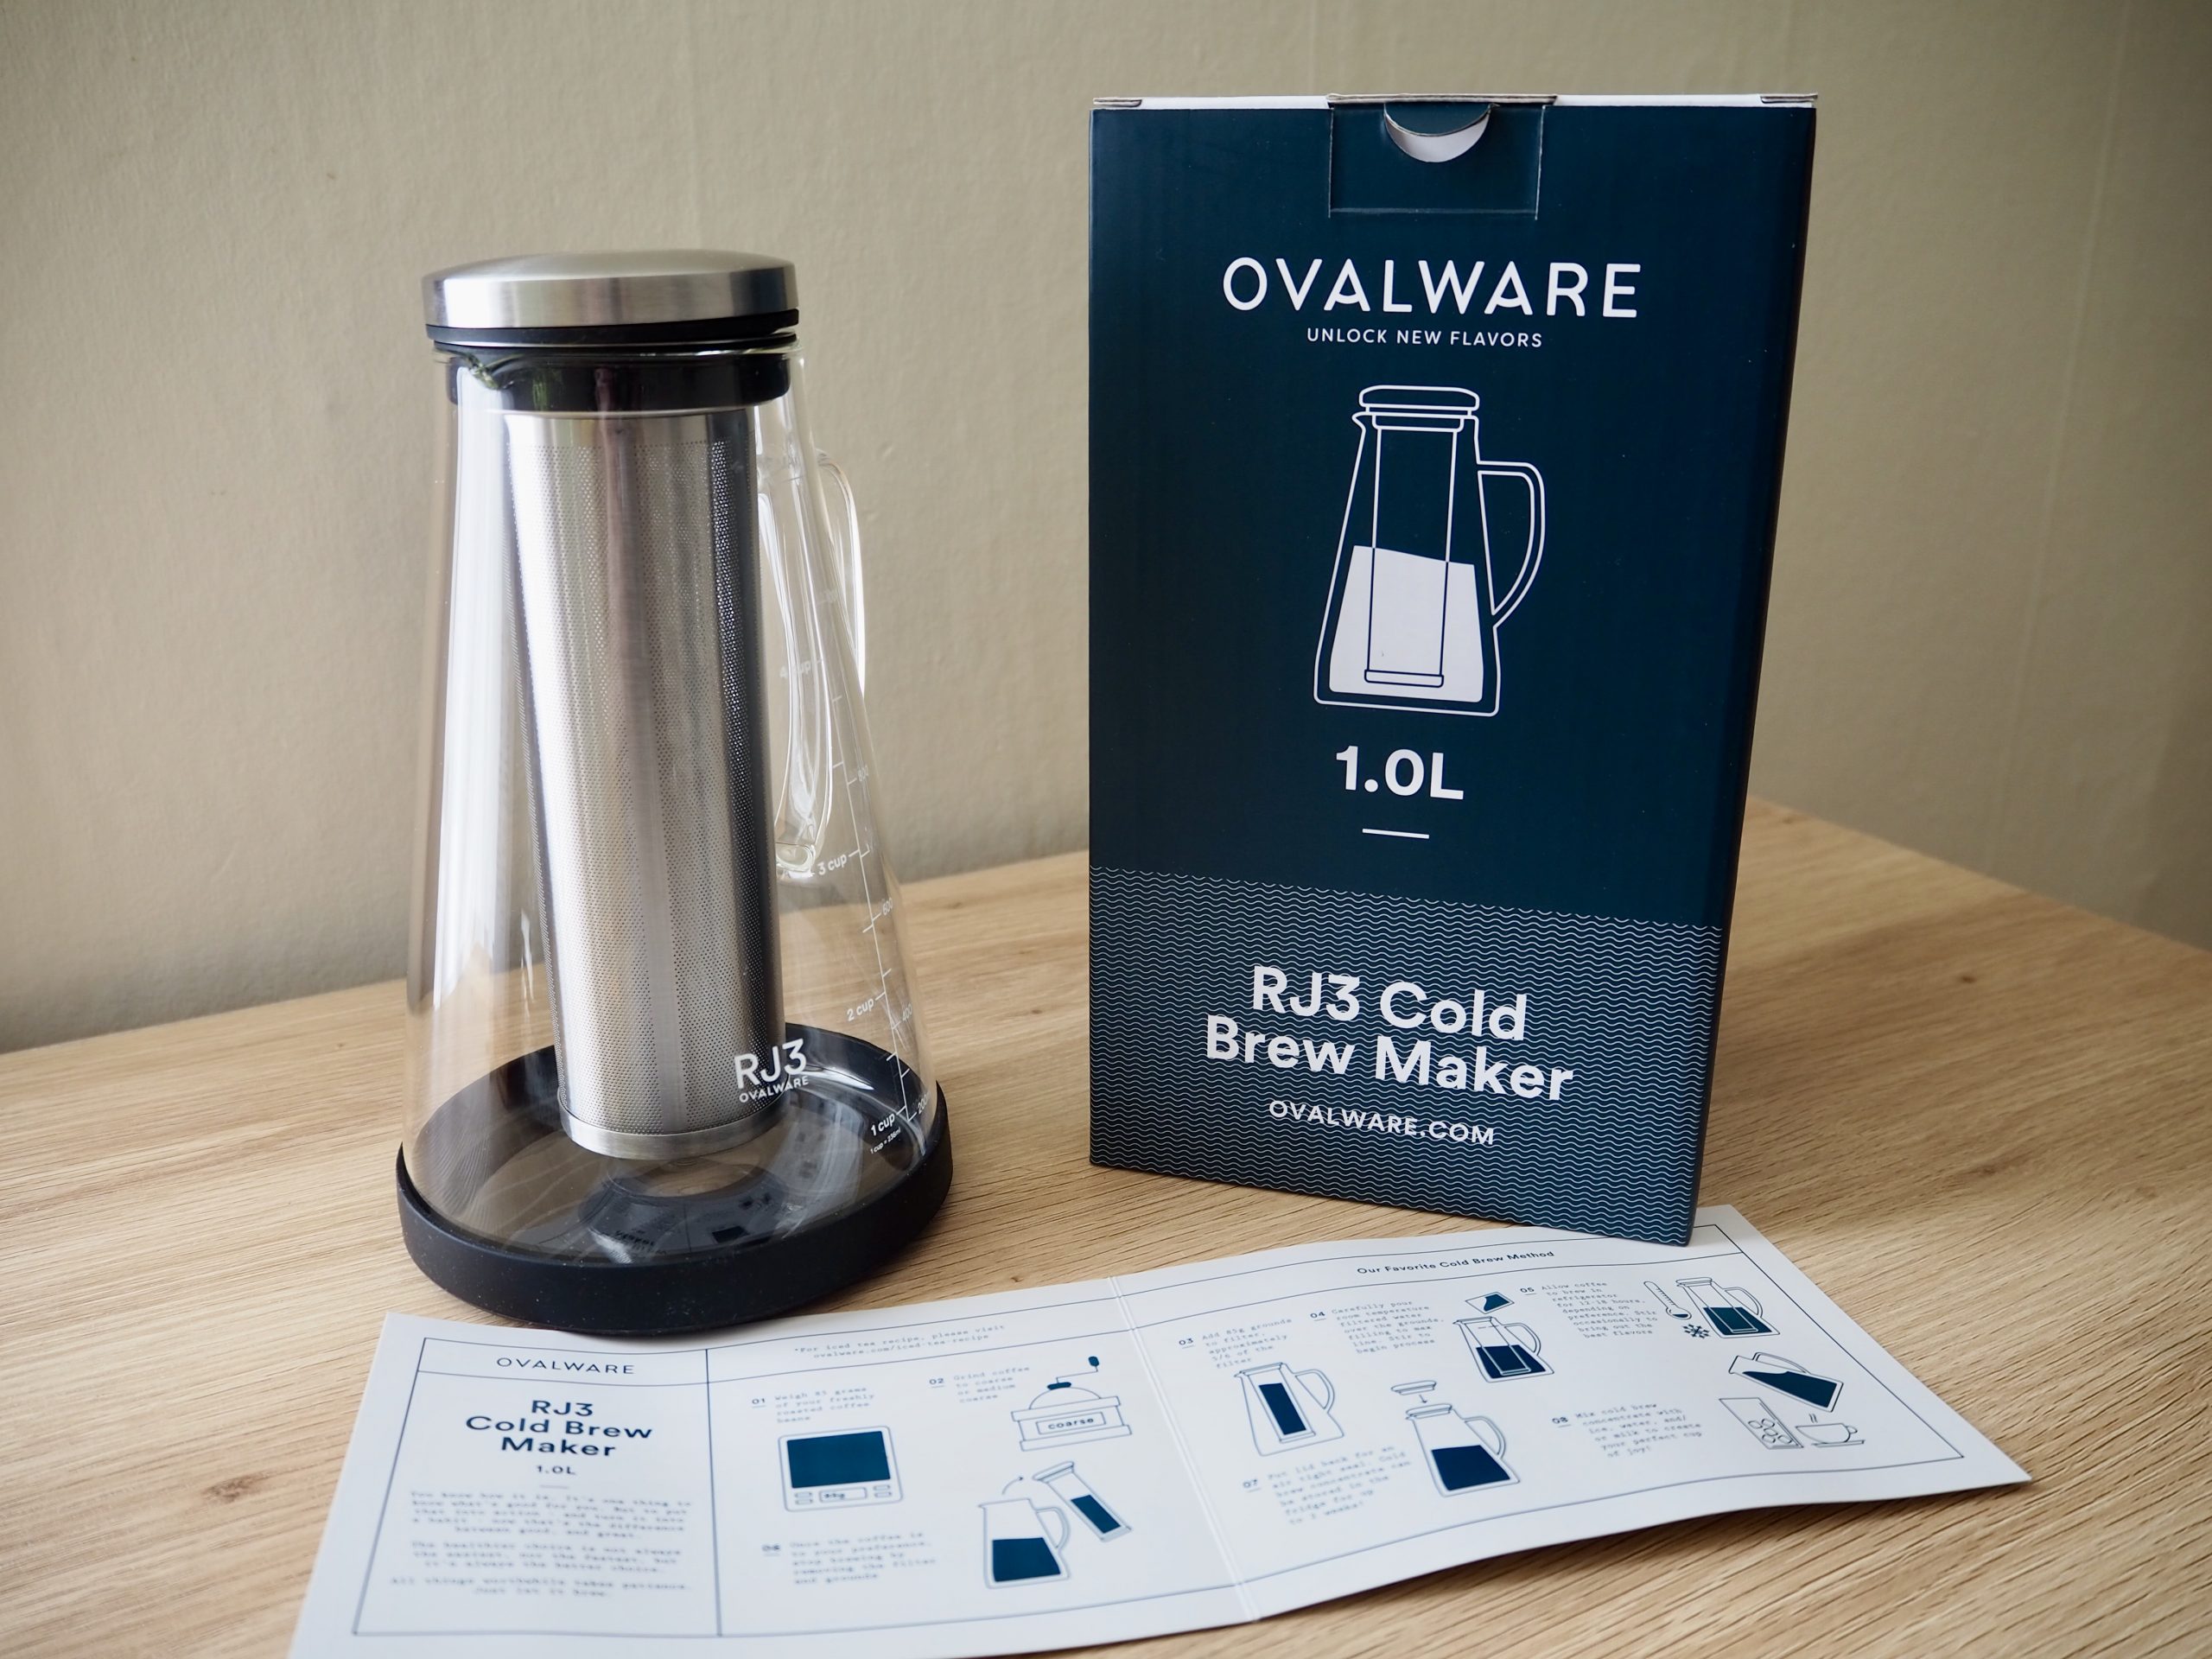 https://coffeeaffection.com/wp-content/uploads/2019/08/Ovalware-RJ3-Cold-Brew-scaled.jpeg